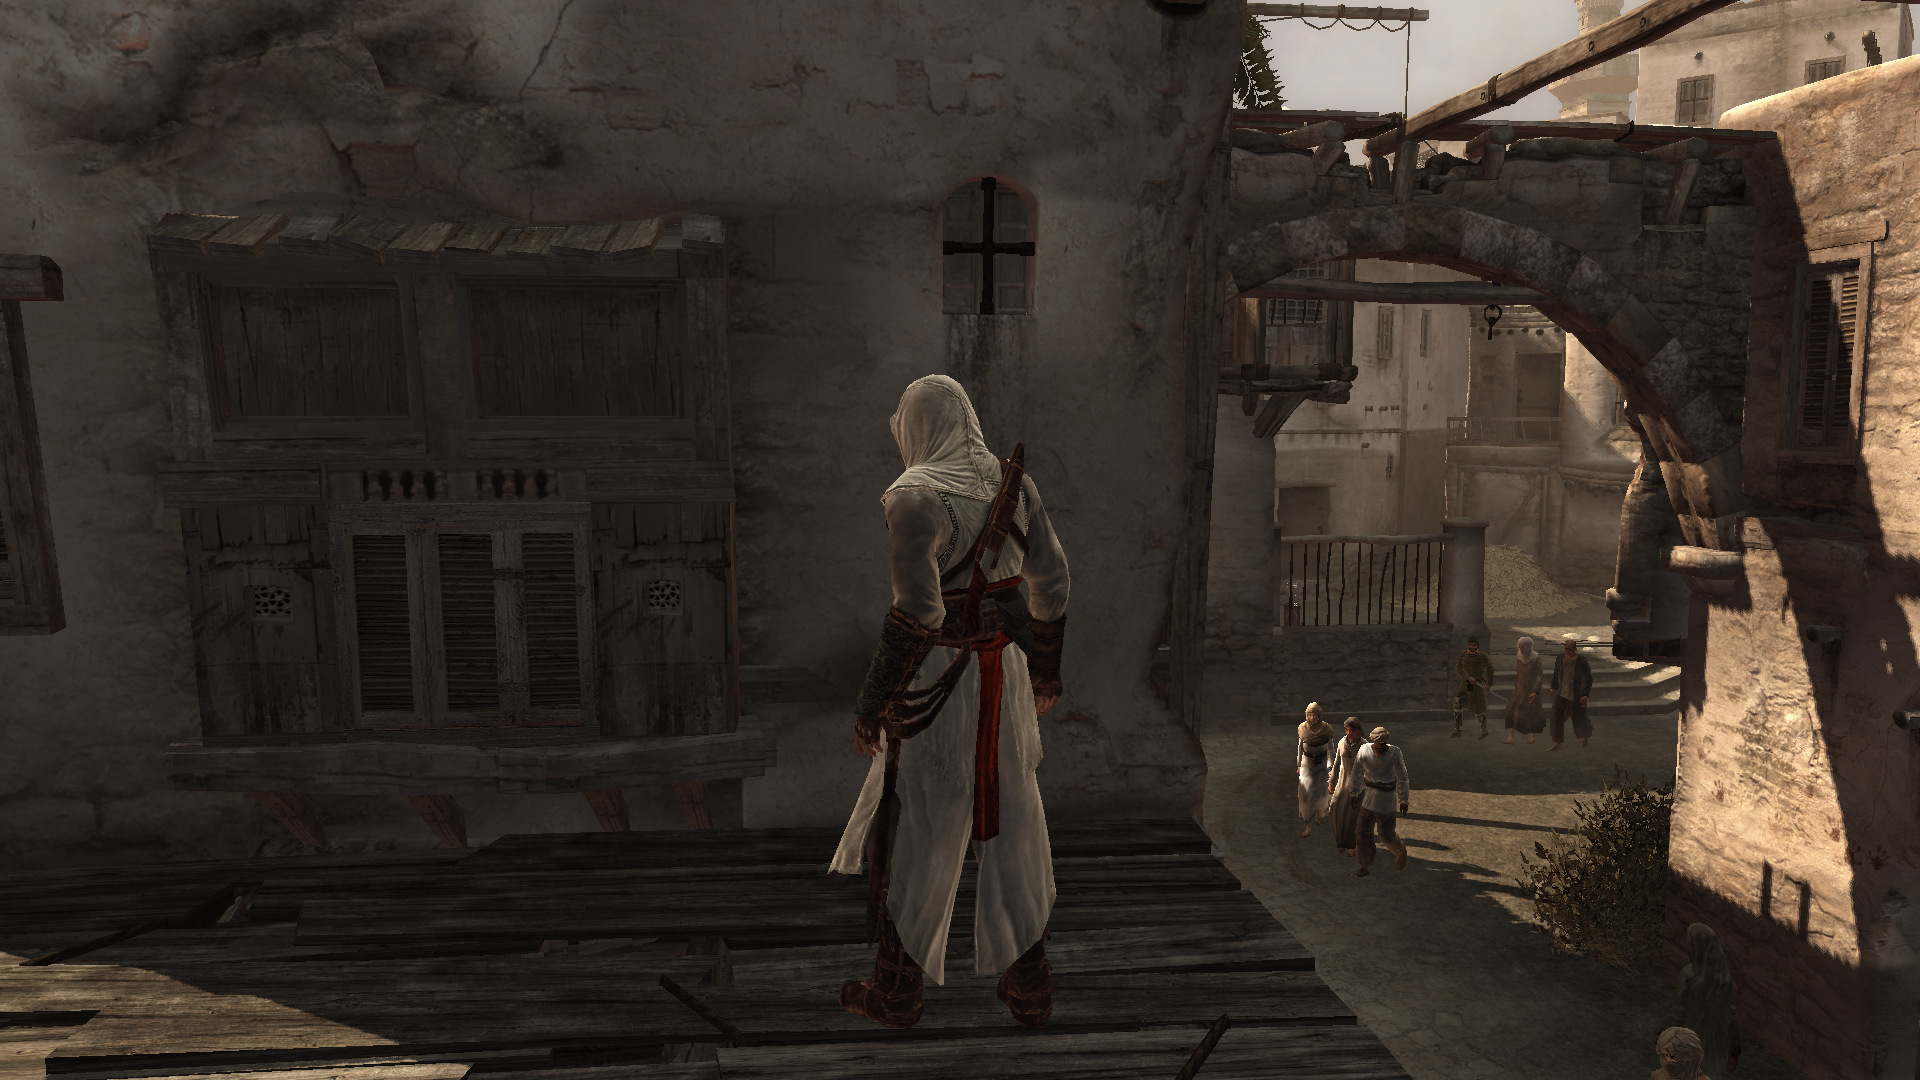 when did assassins creed 1 come out